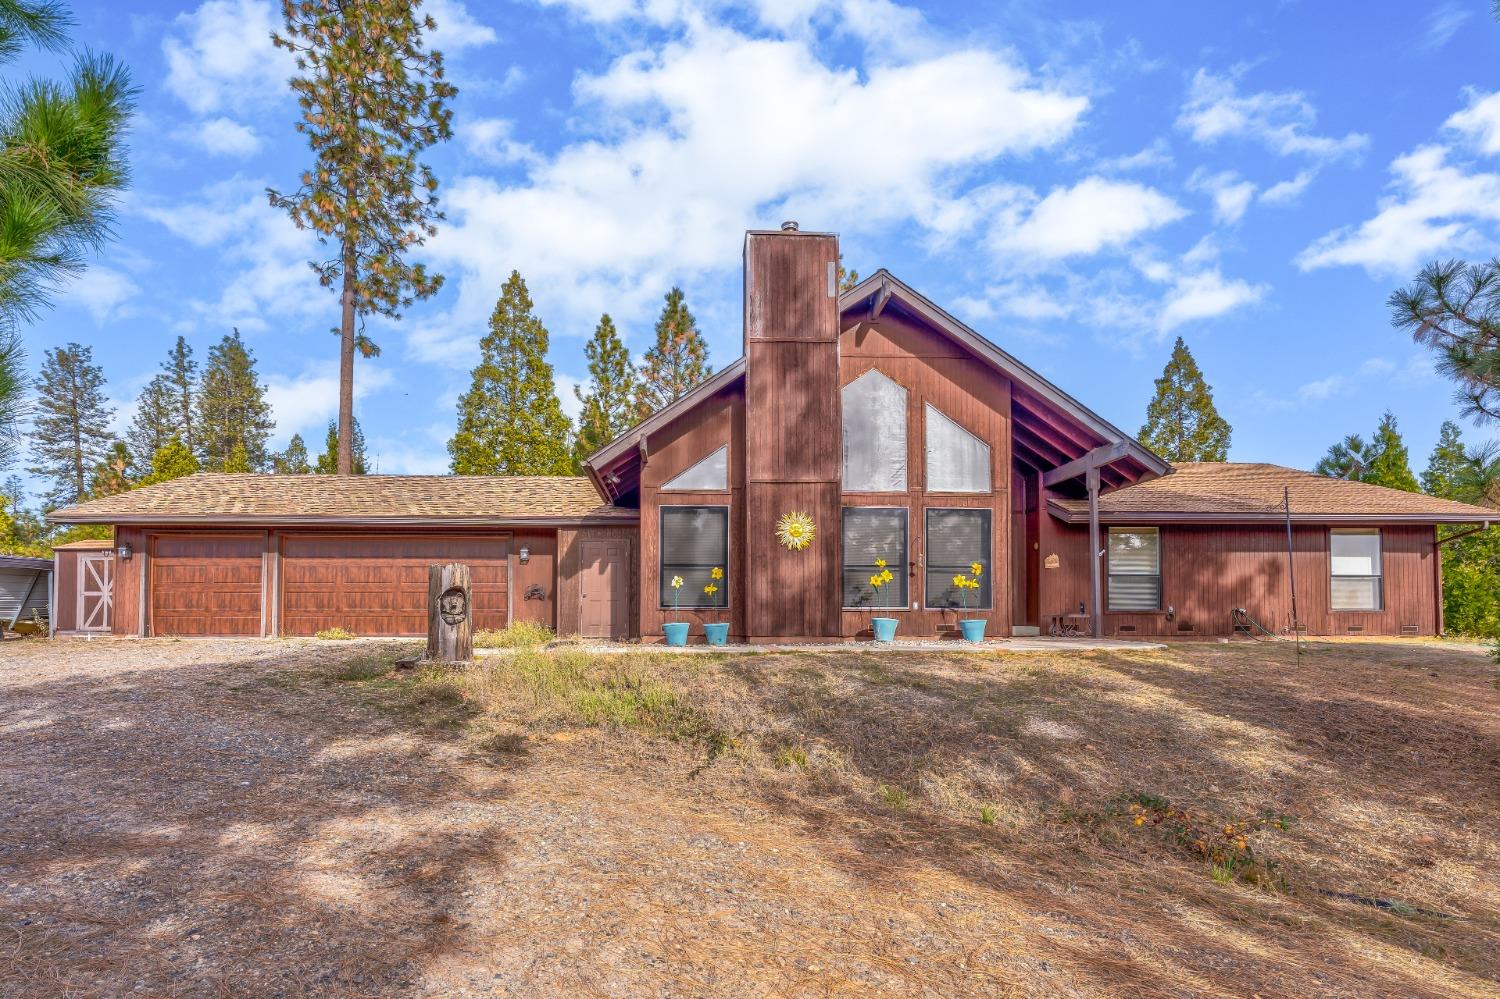 Photo of 53391 Timberview Rd in North Fork, CA